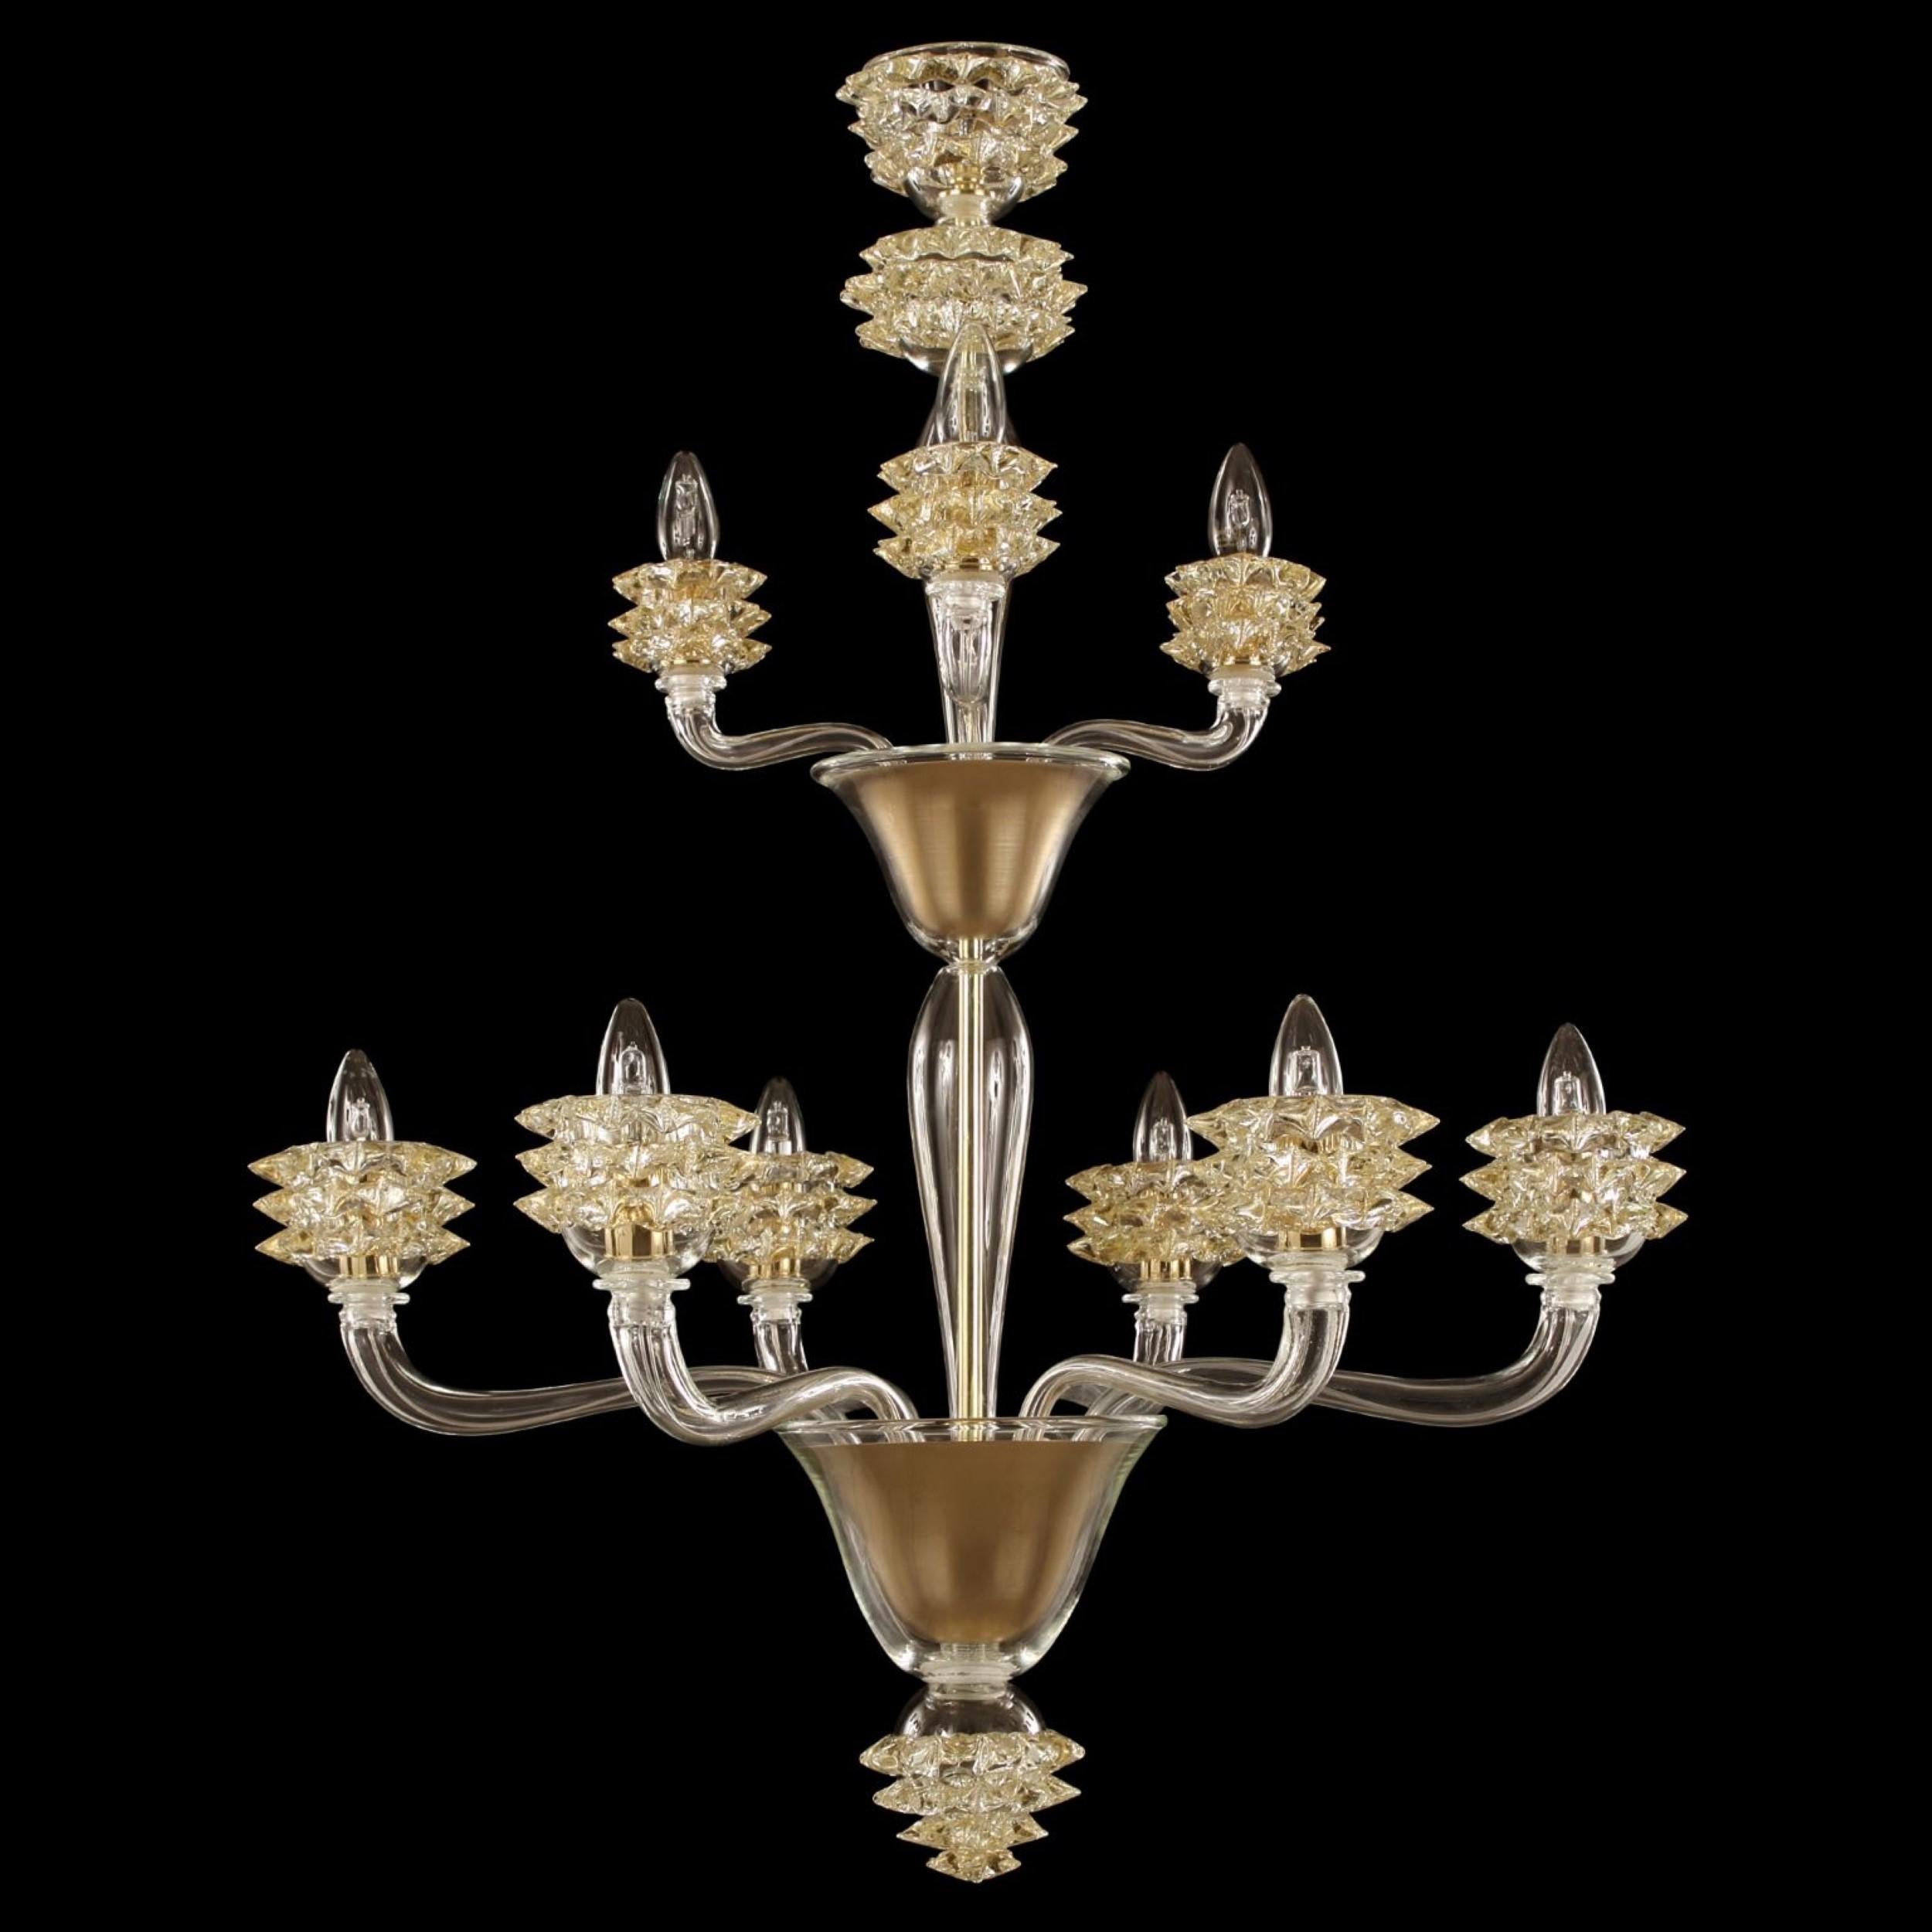 Chandelier 6+3 arms, clear-gold Murano glass Diamante.
The diamante blown glass chandeliers are characterized by a slender central element.
The arms, central column and final cup are made of flawless smooth glass. The standout elements of this